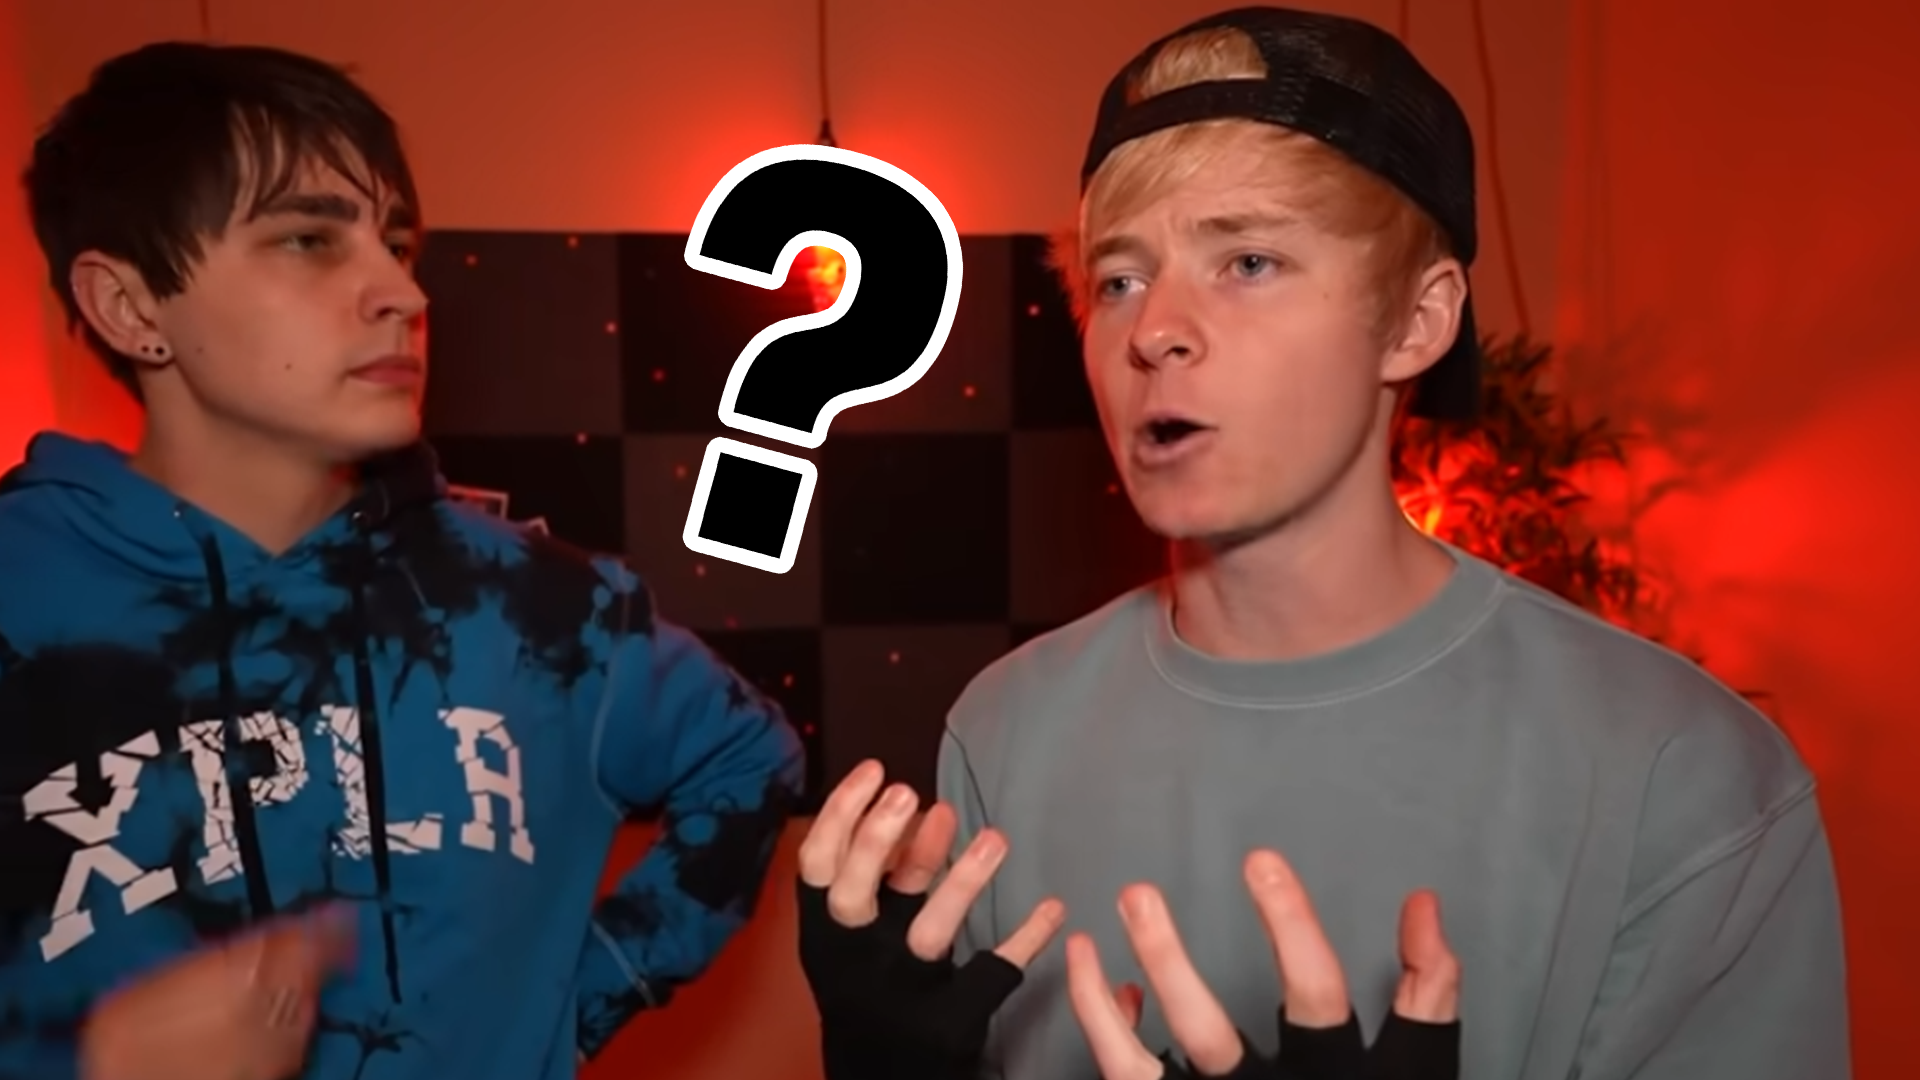 Sam and Colby Quiz How Much Do You Know?